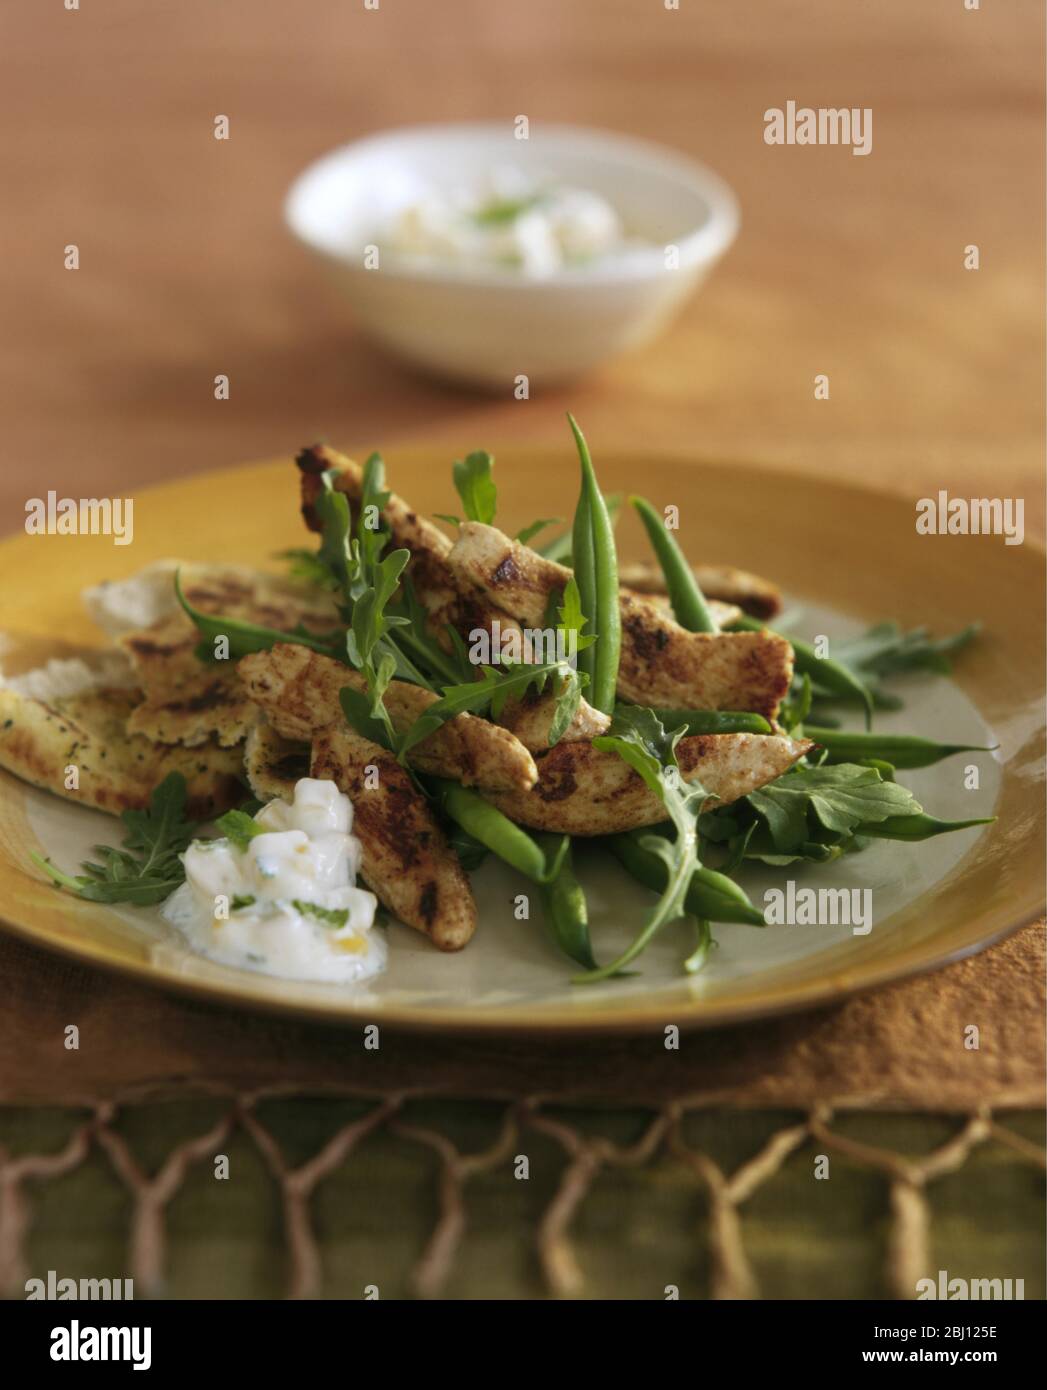 Salad of chicken goujons, green beans and rocket - Stock Photo